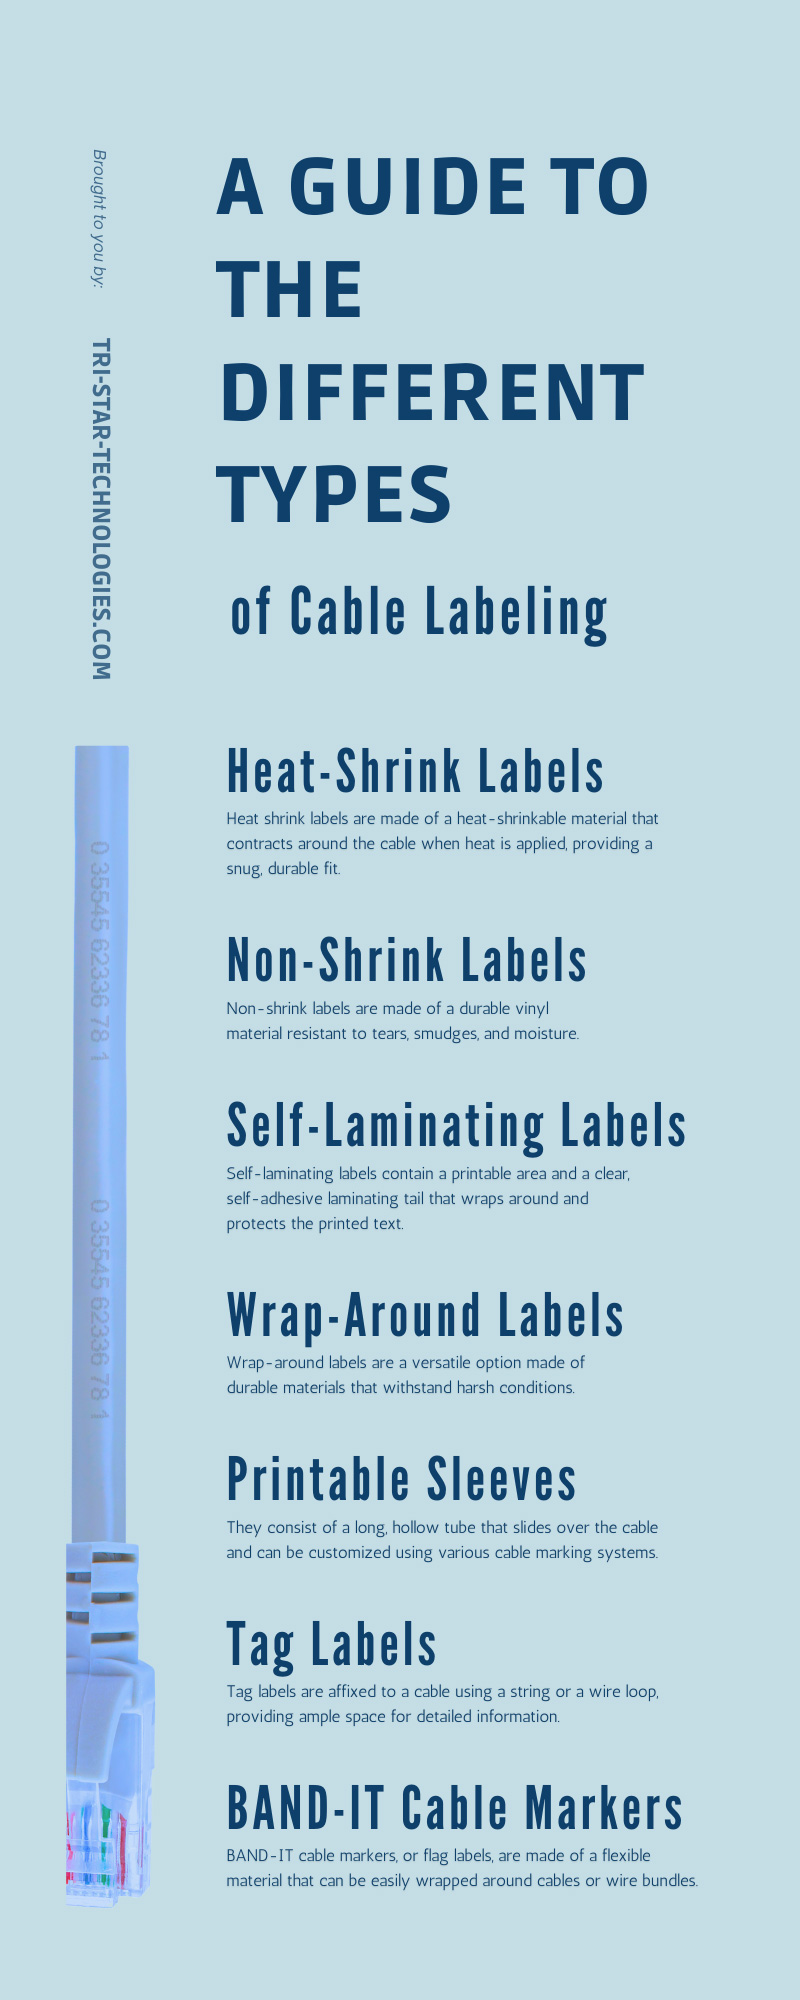 A Guide to the Different Types of Cable Labeling